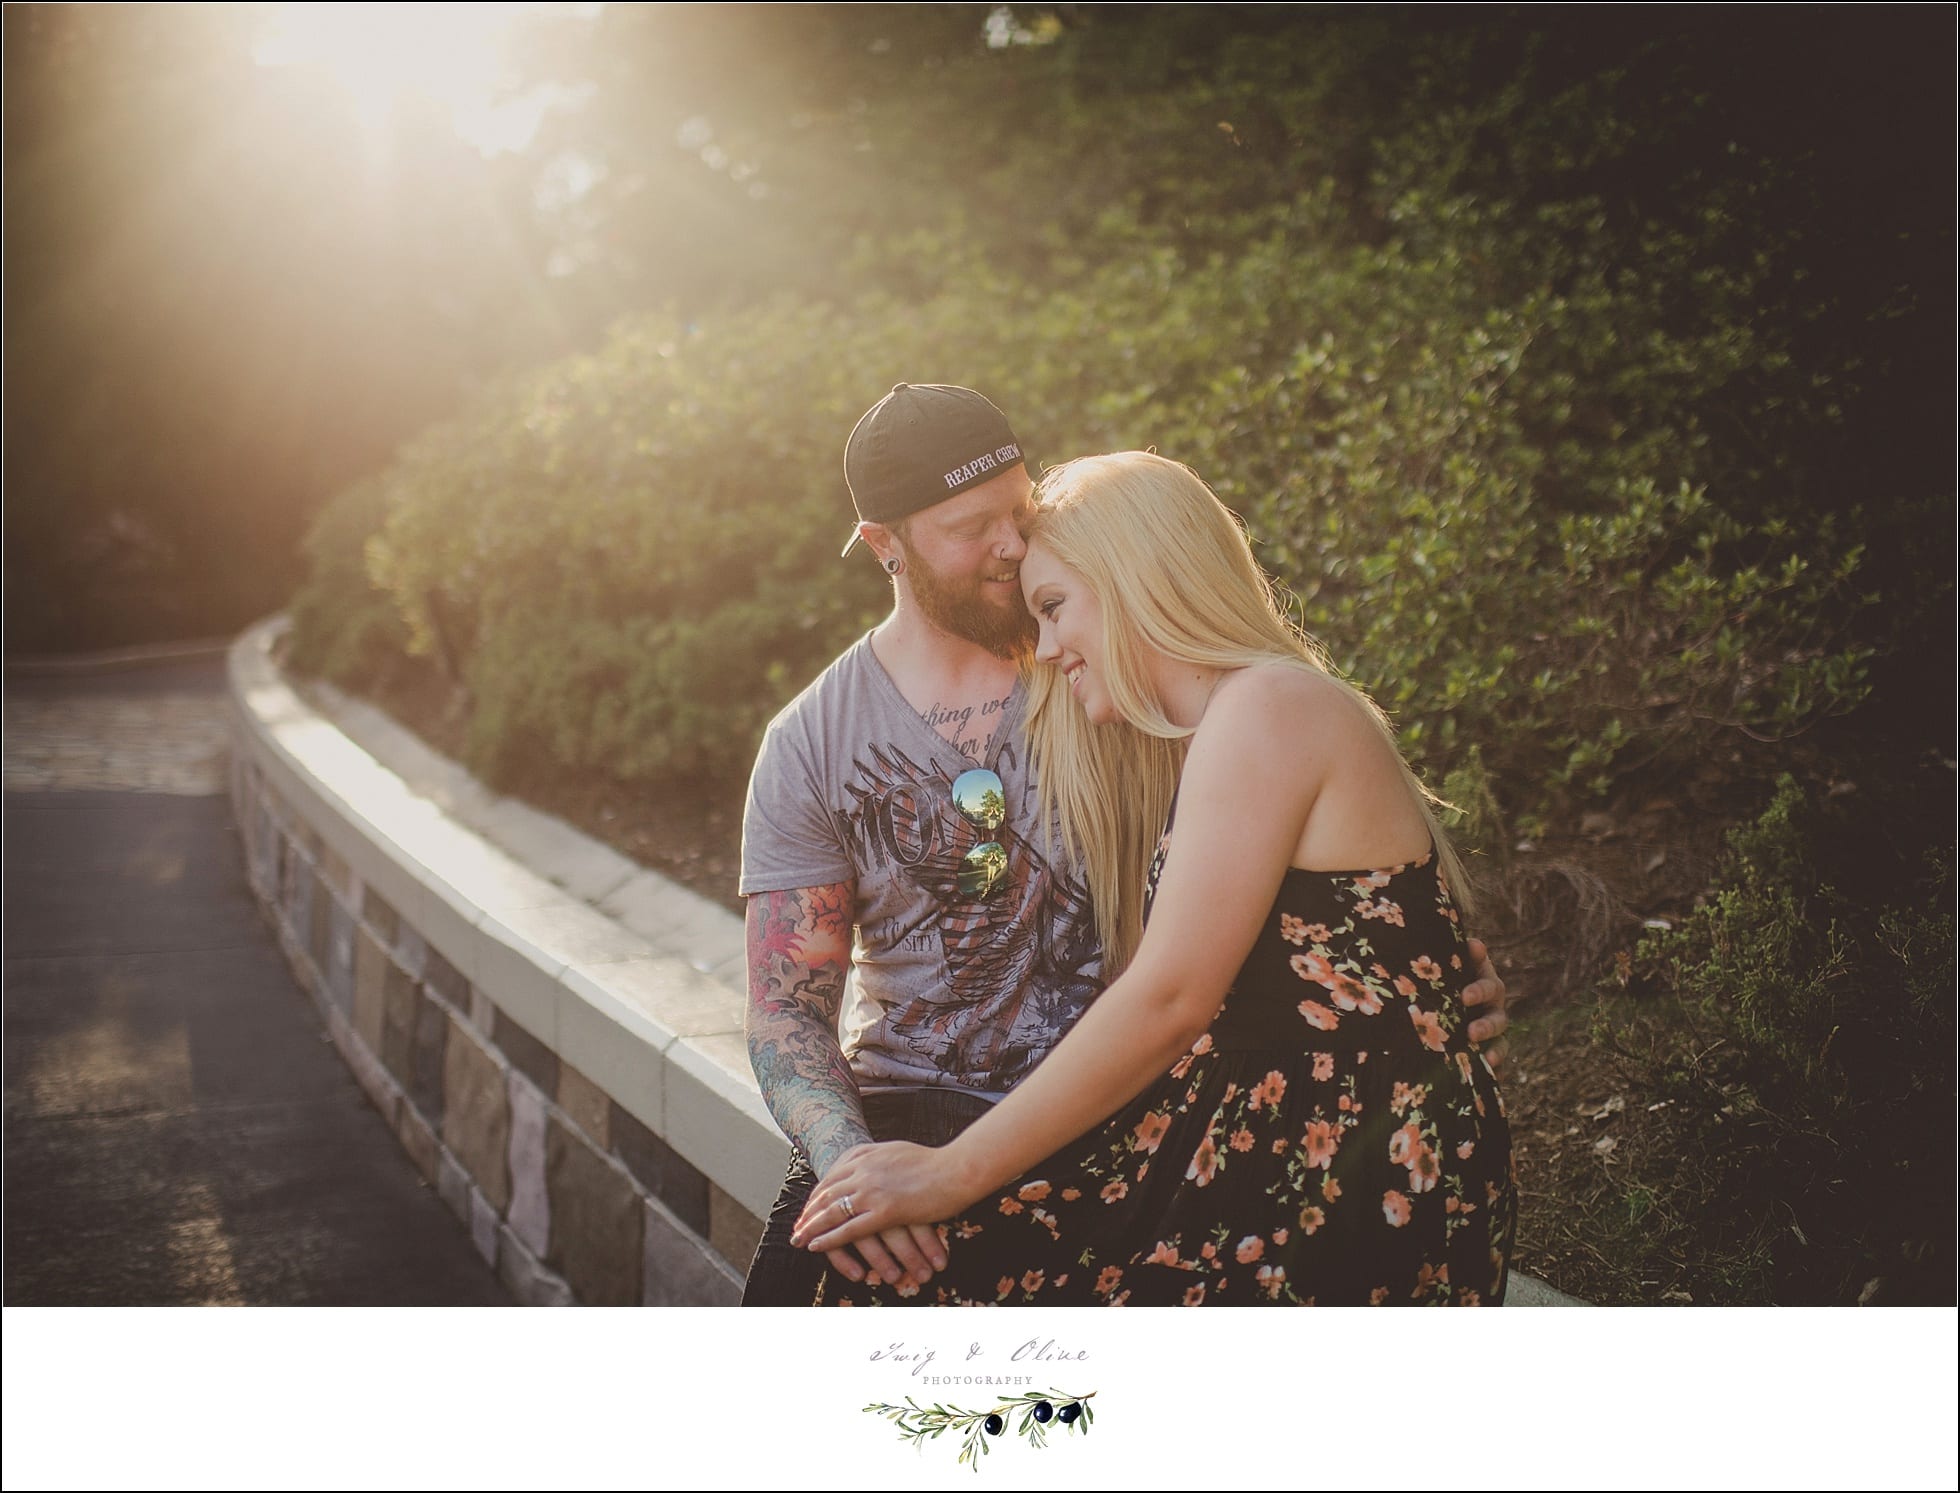 Honeymoon session, Twig and Olive Photography, tattoos, america, happiest place on earth, Walt Disney World, Magic Kingdom, outdoor honeymoon session, gorgeous couples, happy couples, TOP